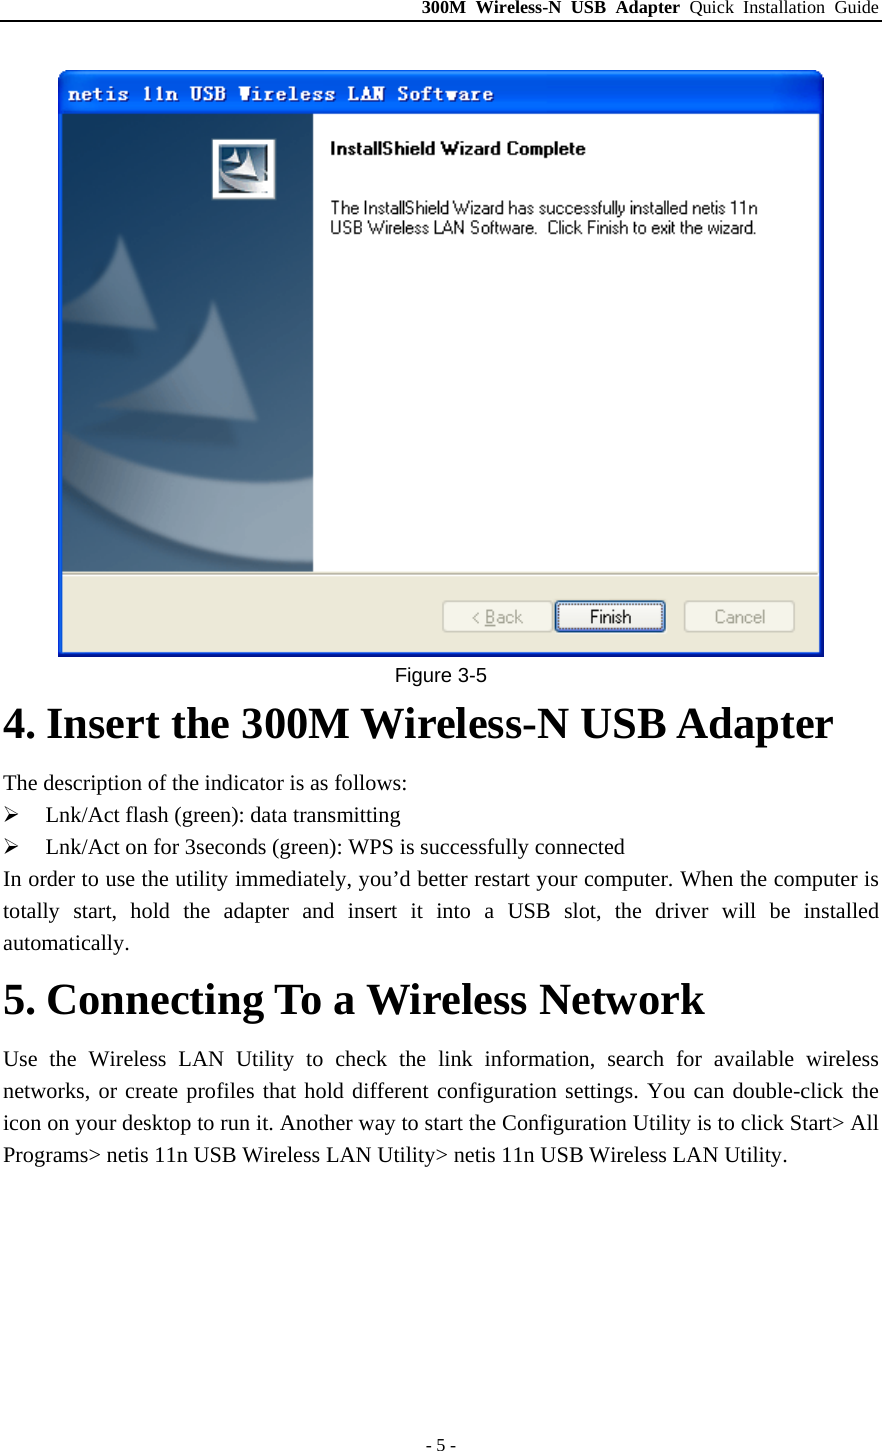 300M Wireless-N USB Adapter Quick Installation Guide - 5 -  Figure 3-5 4. Insert the 300M Wireless-N USB Adapter The description of the indicator is as follows: ¾ Lnk/Act flash (green): data transmitting ¾ Lnk/Act on for 3seconds (green): WPS is successfully connected In order to use the utility immediately, you’d better restart your computer. When the computer is totally start, hold the adapter and insert it into a USB slot, the driver will be installed automatically. 5. Connecting To a Wireless Network Use the Wireless LAN Utility to check the link information, search for available wireless networks, or create profiles that hold different configuration settings. You can double-click the icon on your desktop to run it. Another way to start the Configuration Utility is to click Start&gt; All Programs&gt; netis 11n USB Wireless LAN Utility&gt; netis 11n USB Wireless LAN Utility. 